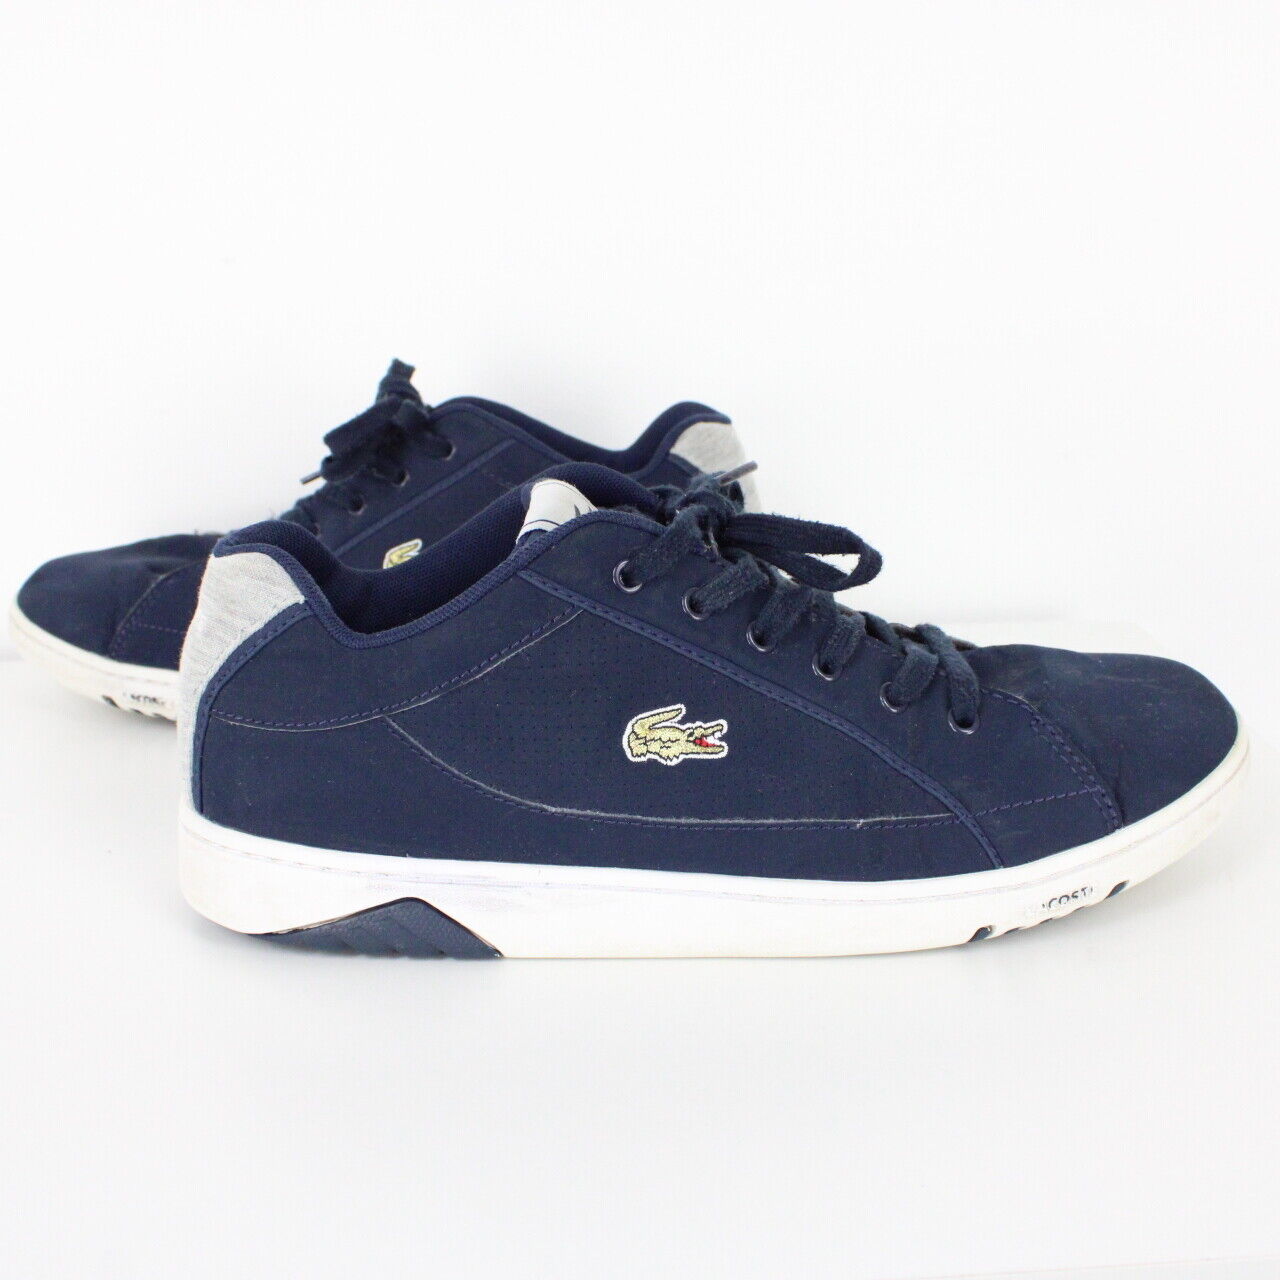 Mens LACOSTE Deviation II Trainers Navy Blue | UK 10